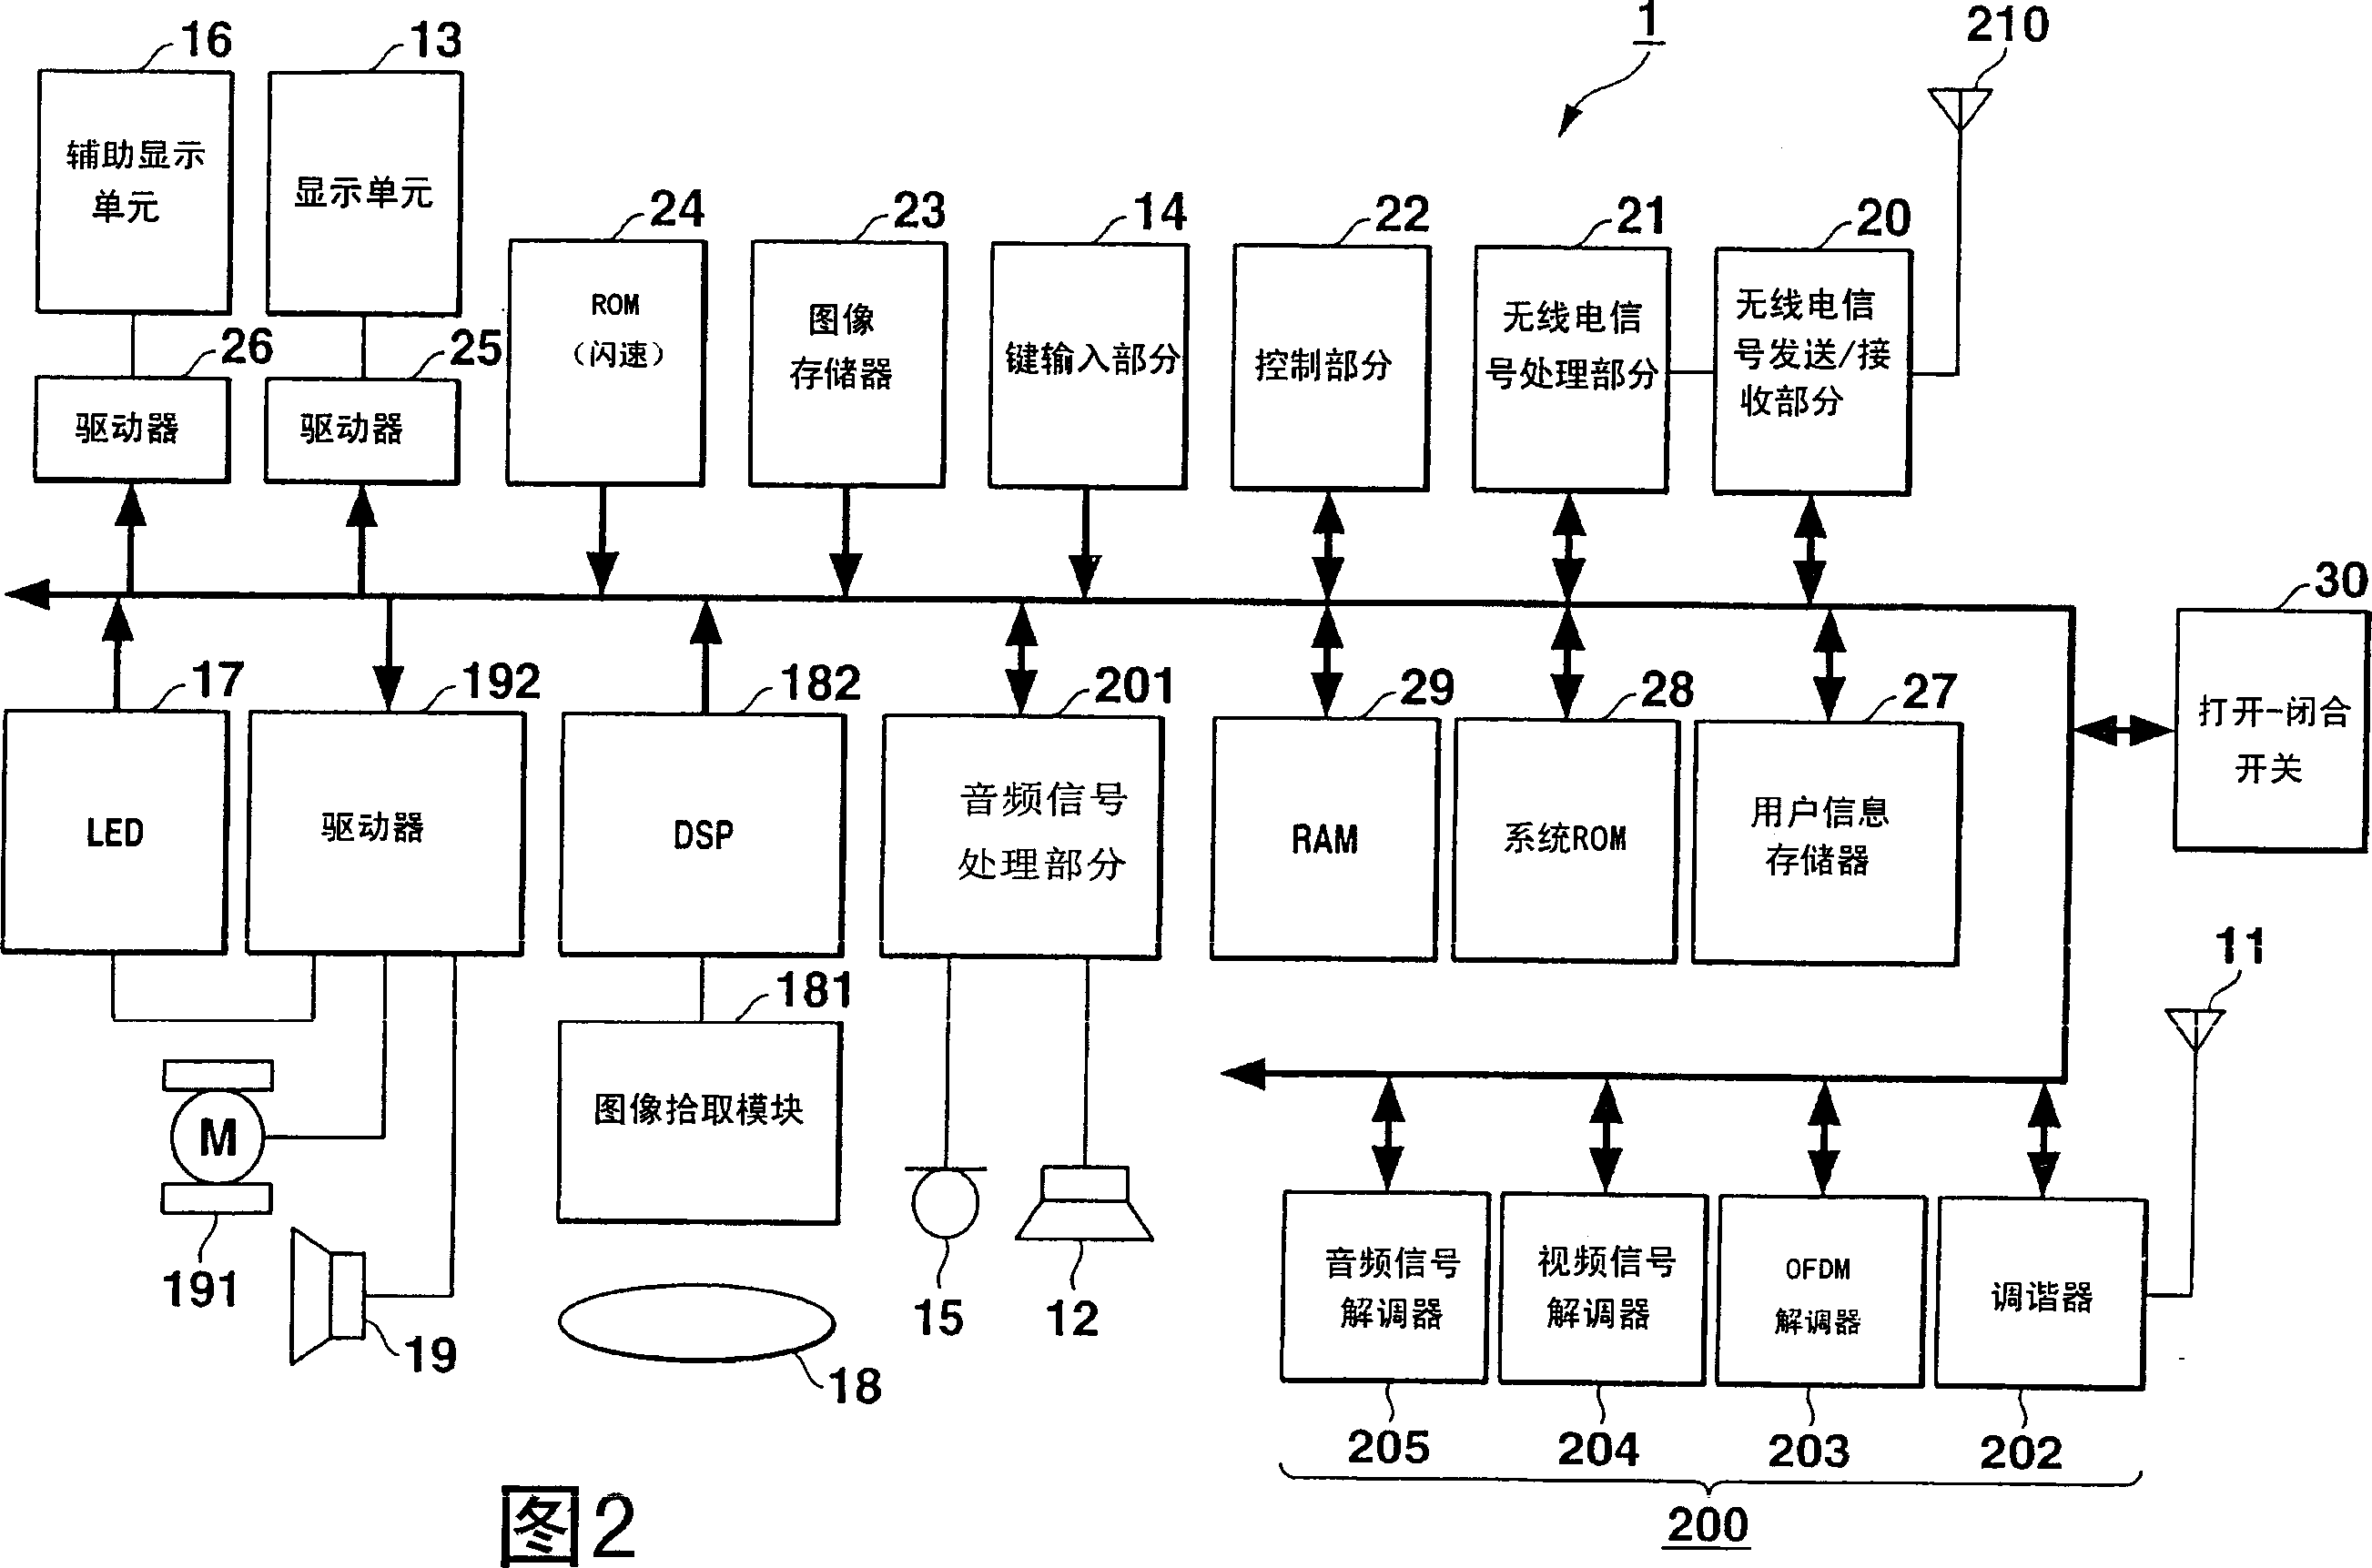 Cellular phone having a function of receiving a television broadcasting wave